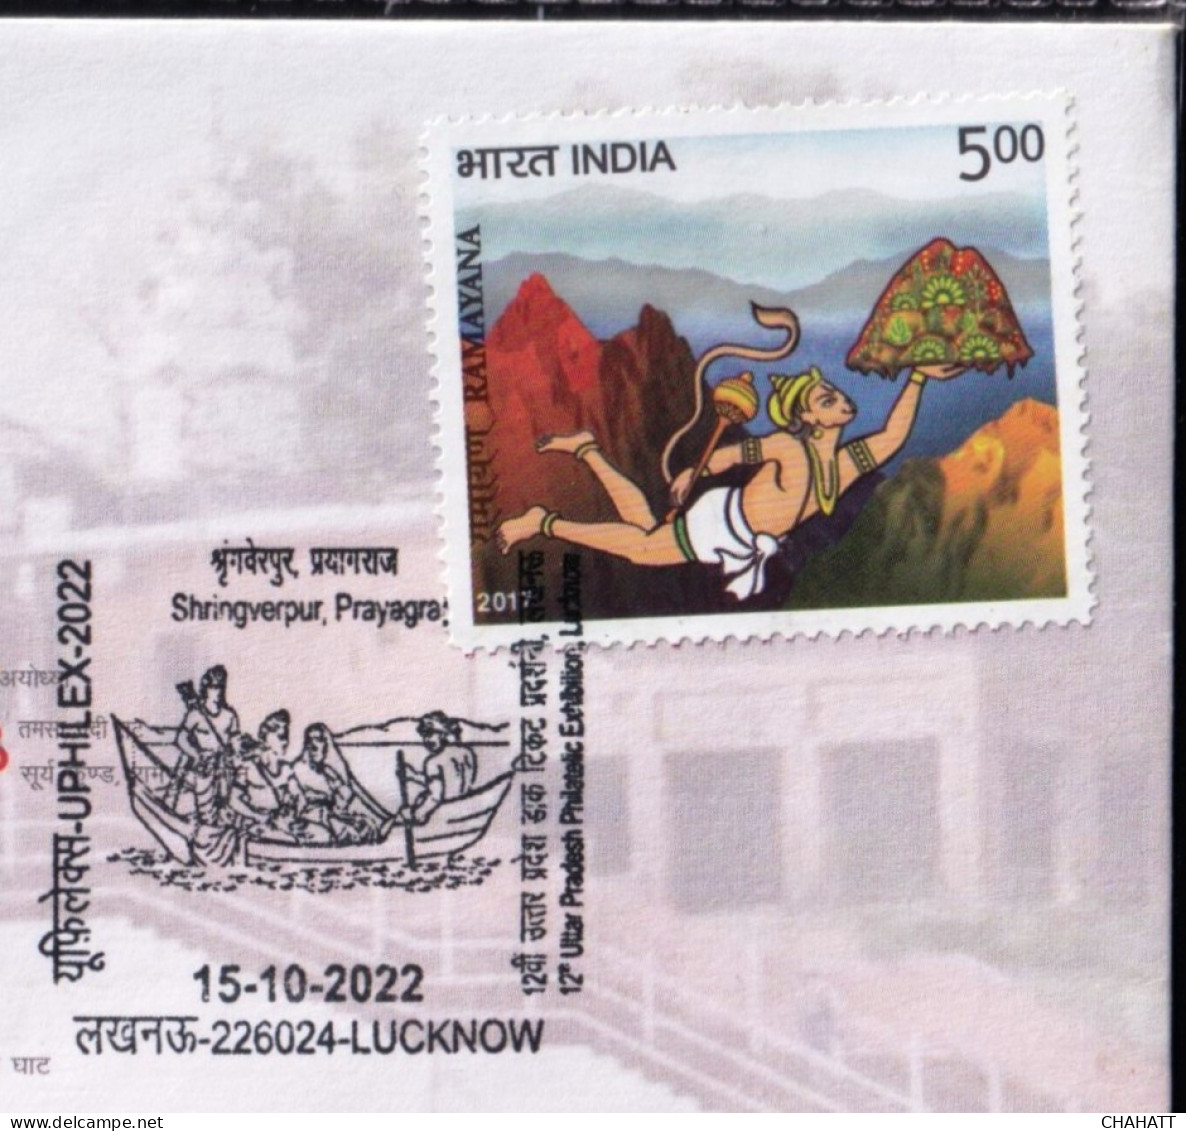 HINDUISM - RAMAYAN- SRINGESWAR- RIVER CROSSING BY BOAT - PICTORIAL CANCELLATION - SPECIAL COVER - INDIA -2022- BX4-23 - Hinduismus